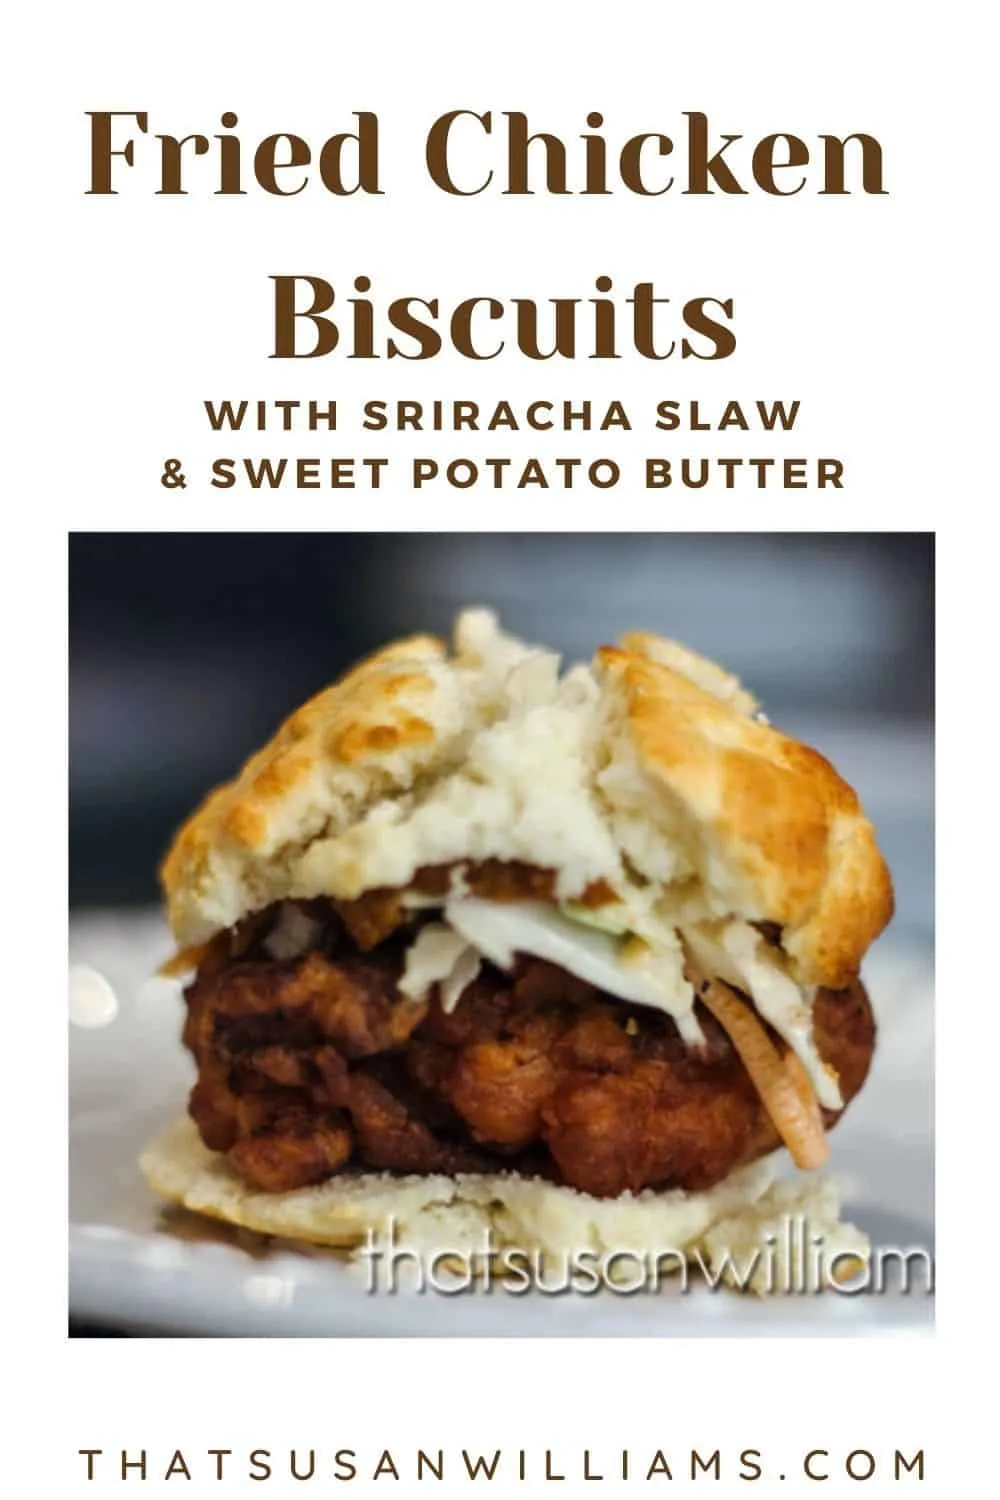 Fried Chicken Biscuits with Sriracha Slaw and Sweet Potato Butter